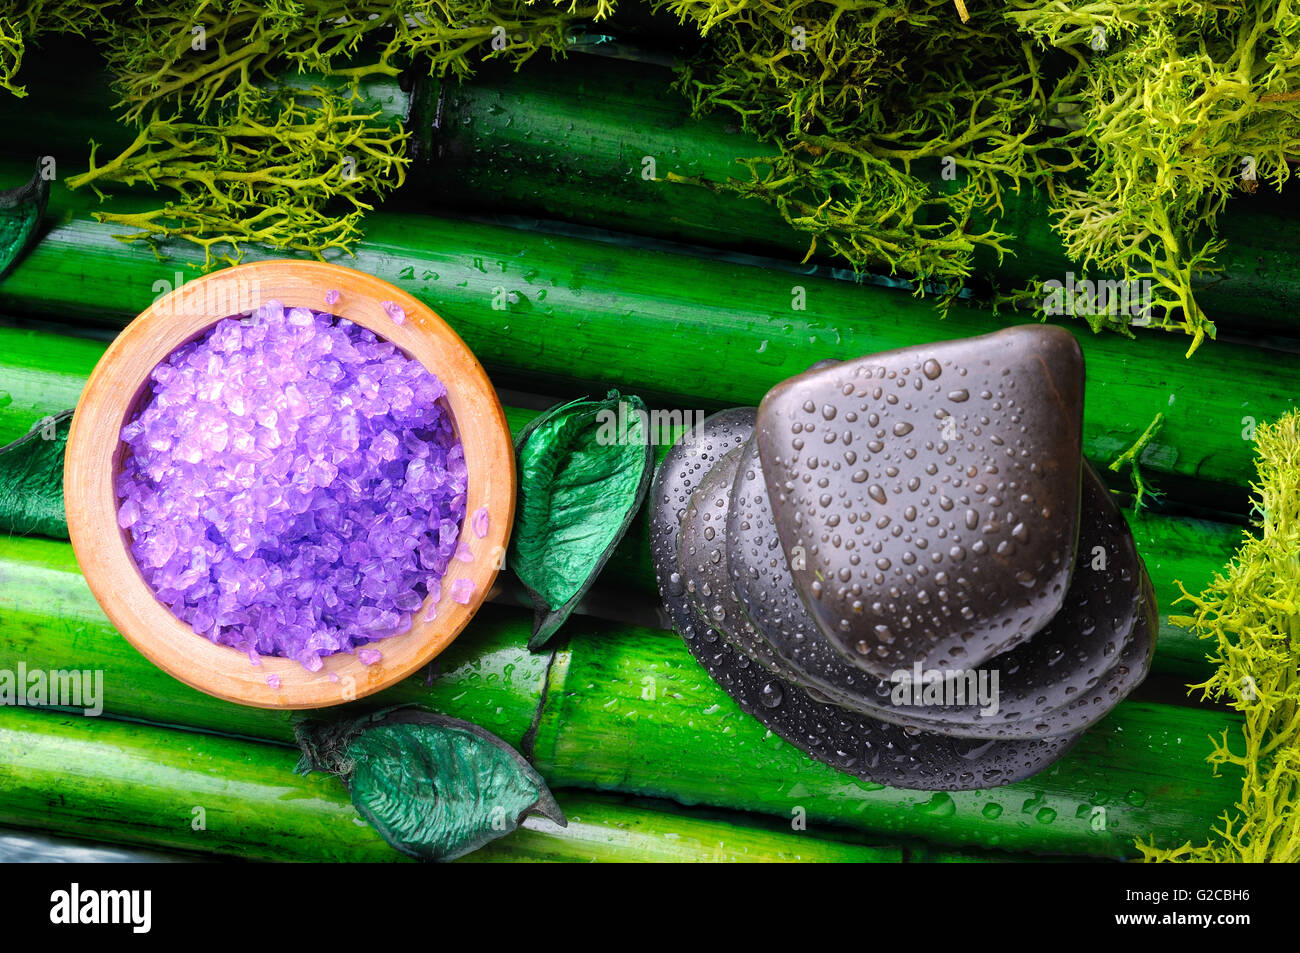 Stack of black stones and salt for massage and bath surrounded by moss on bamboo. Concept of massage and alternative medicines. Stock Photo